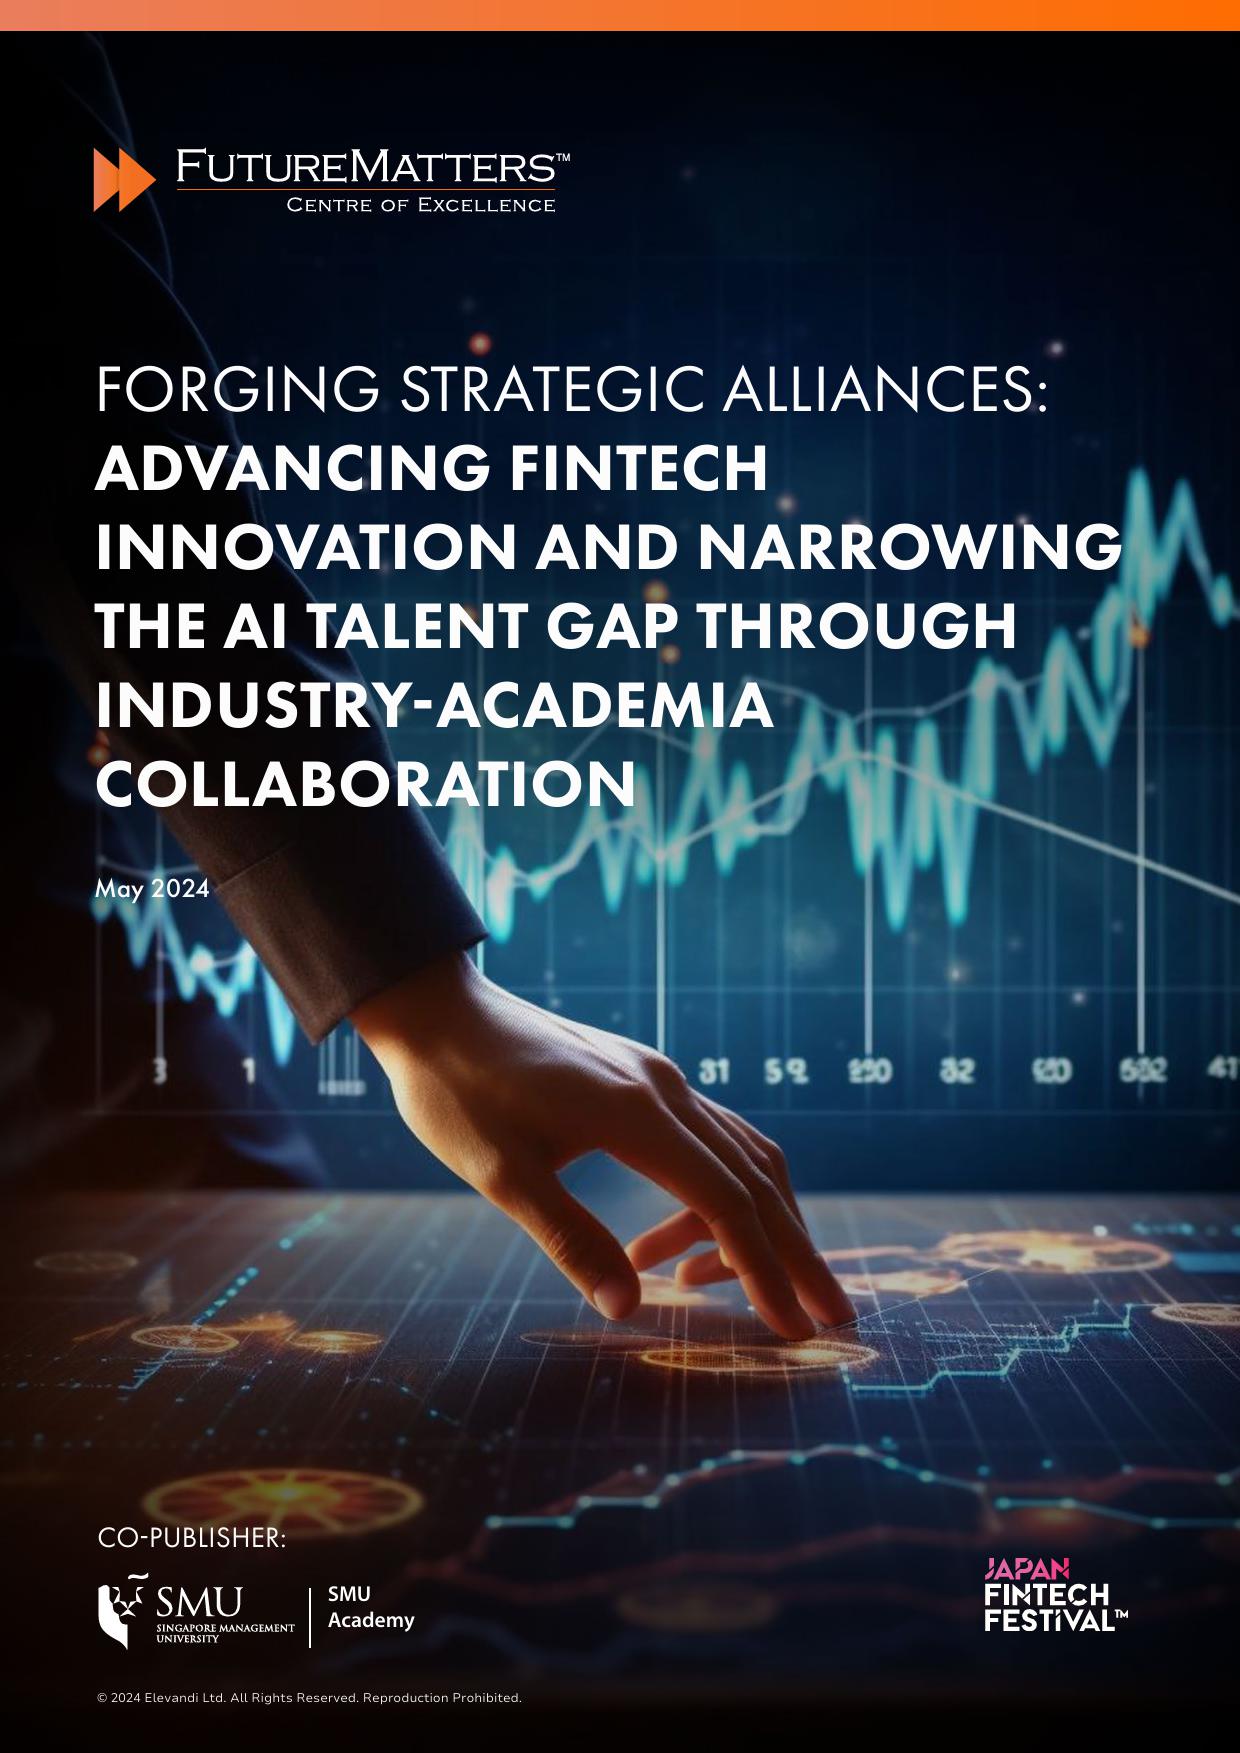 JFF 2024_Forging Strategic Alliances Advancing FinTech Innovation and Narrowing the AI Talent Gap through Industry-Academia Collaboration_final-May-20-2024-03-01-56-5793-AM